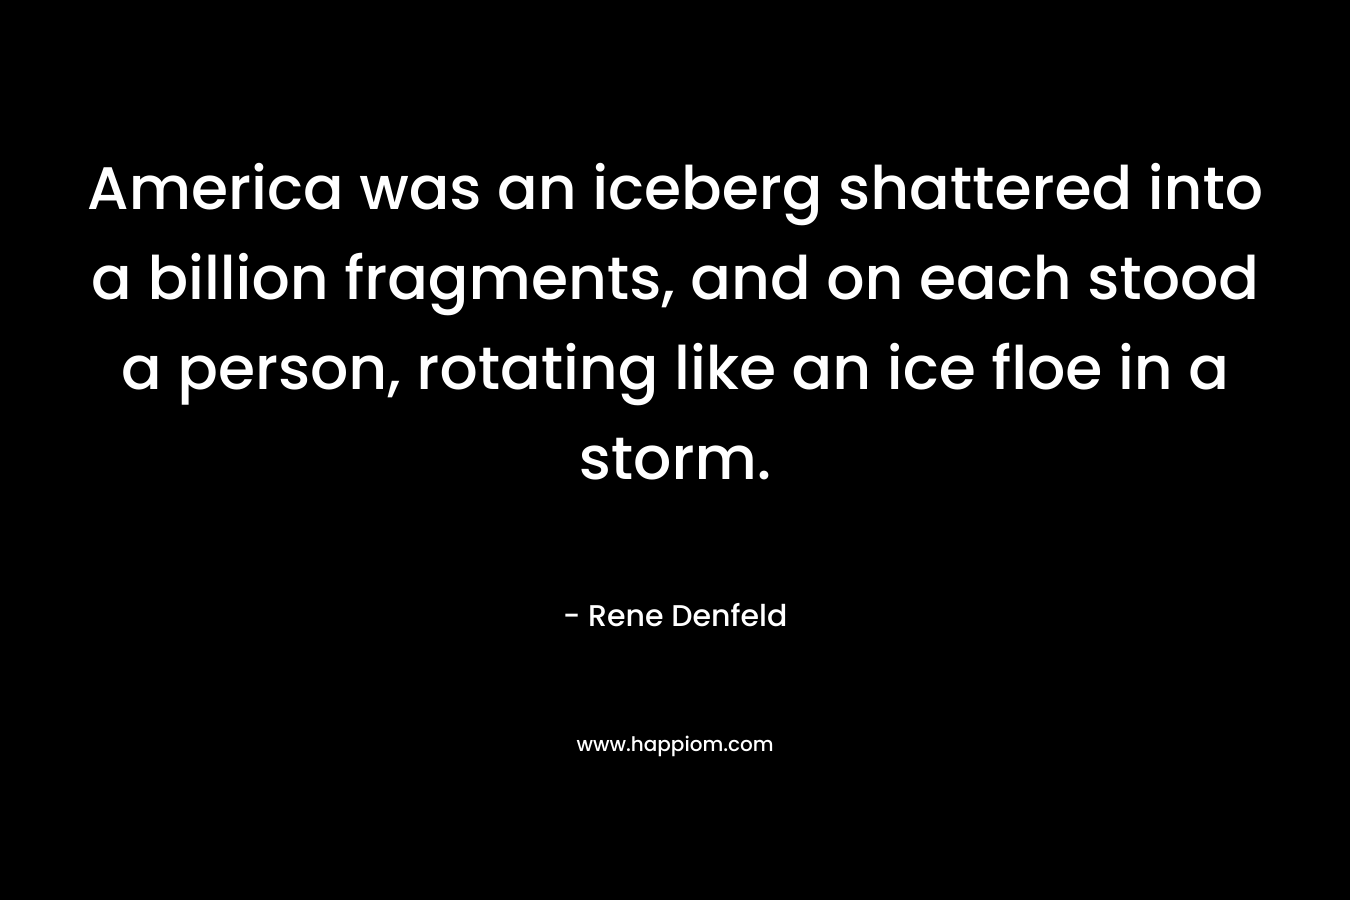 America was an iceberg shattered into a billion fragments, and on each stood a person, rotating like an ice floe in a storm. – Rene Denfeld